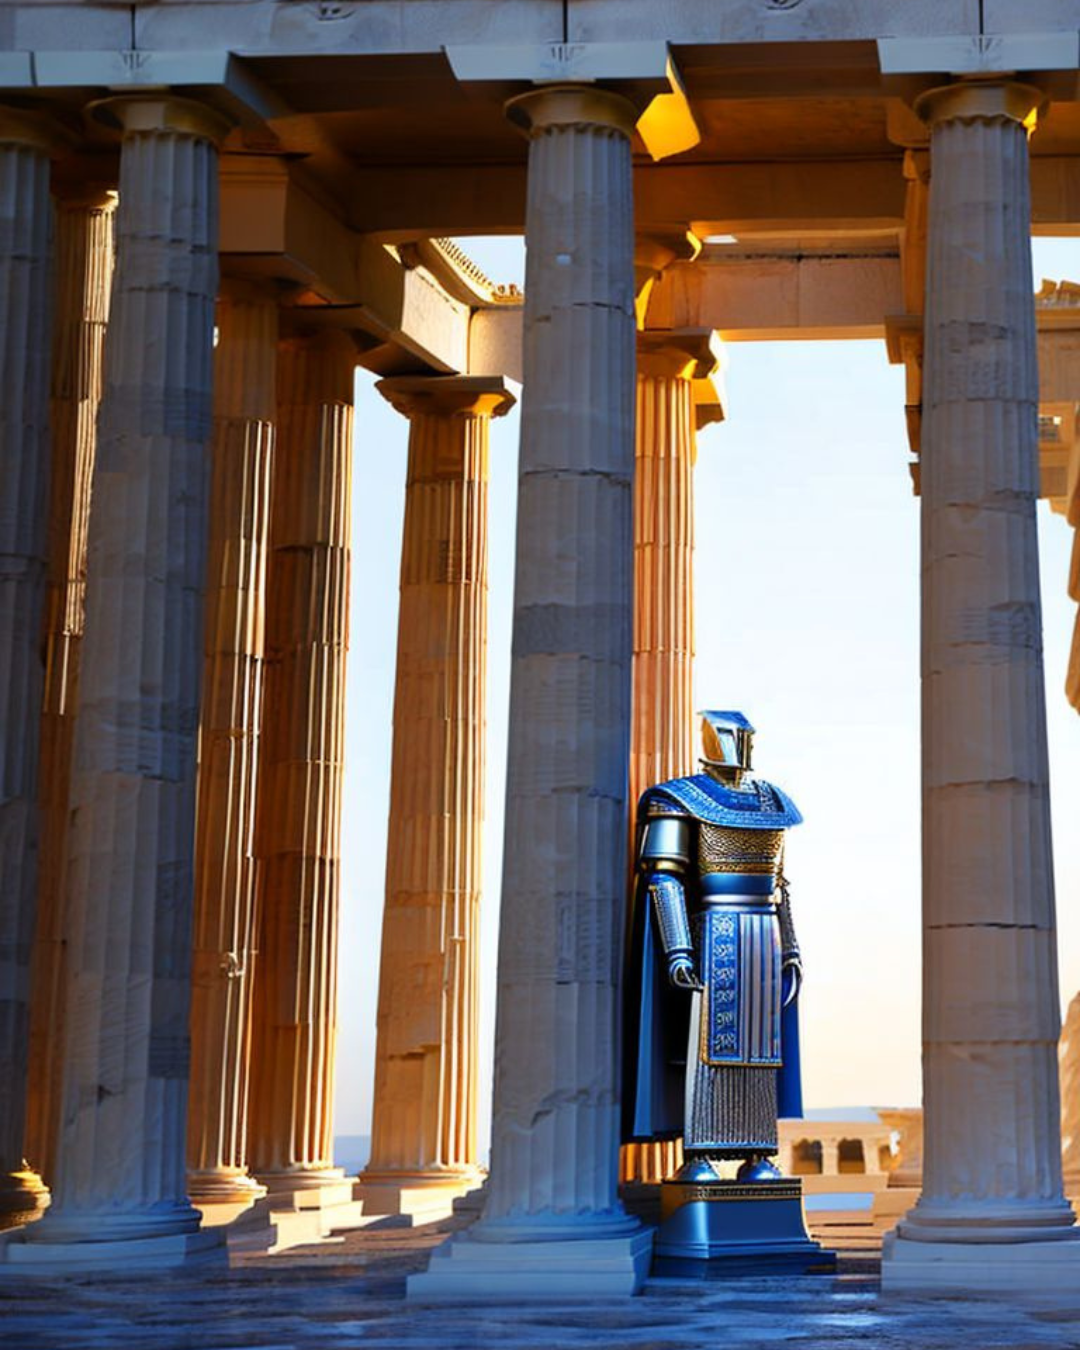 An Artificial Intelligence Problem Robot Philosopher In The Parthenon